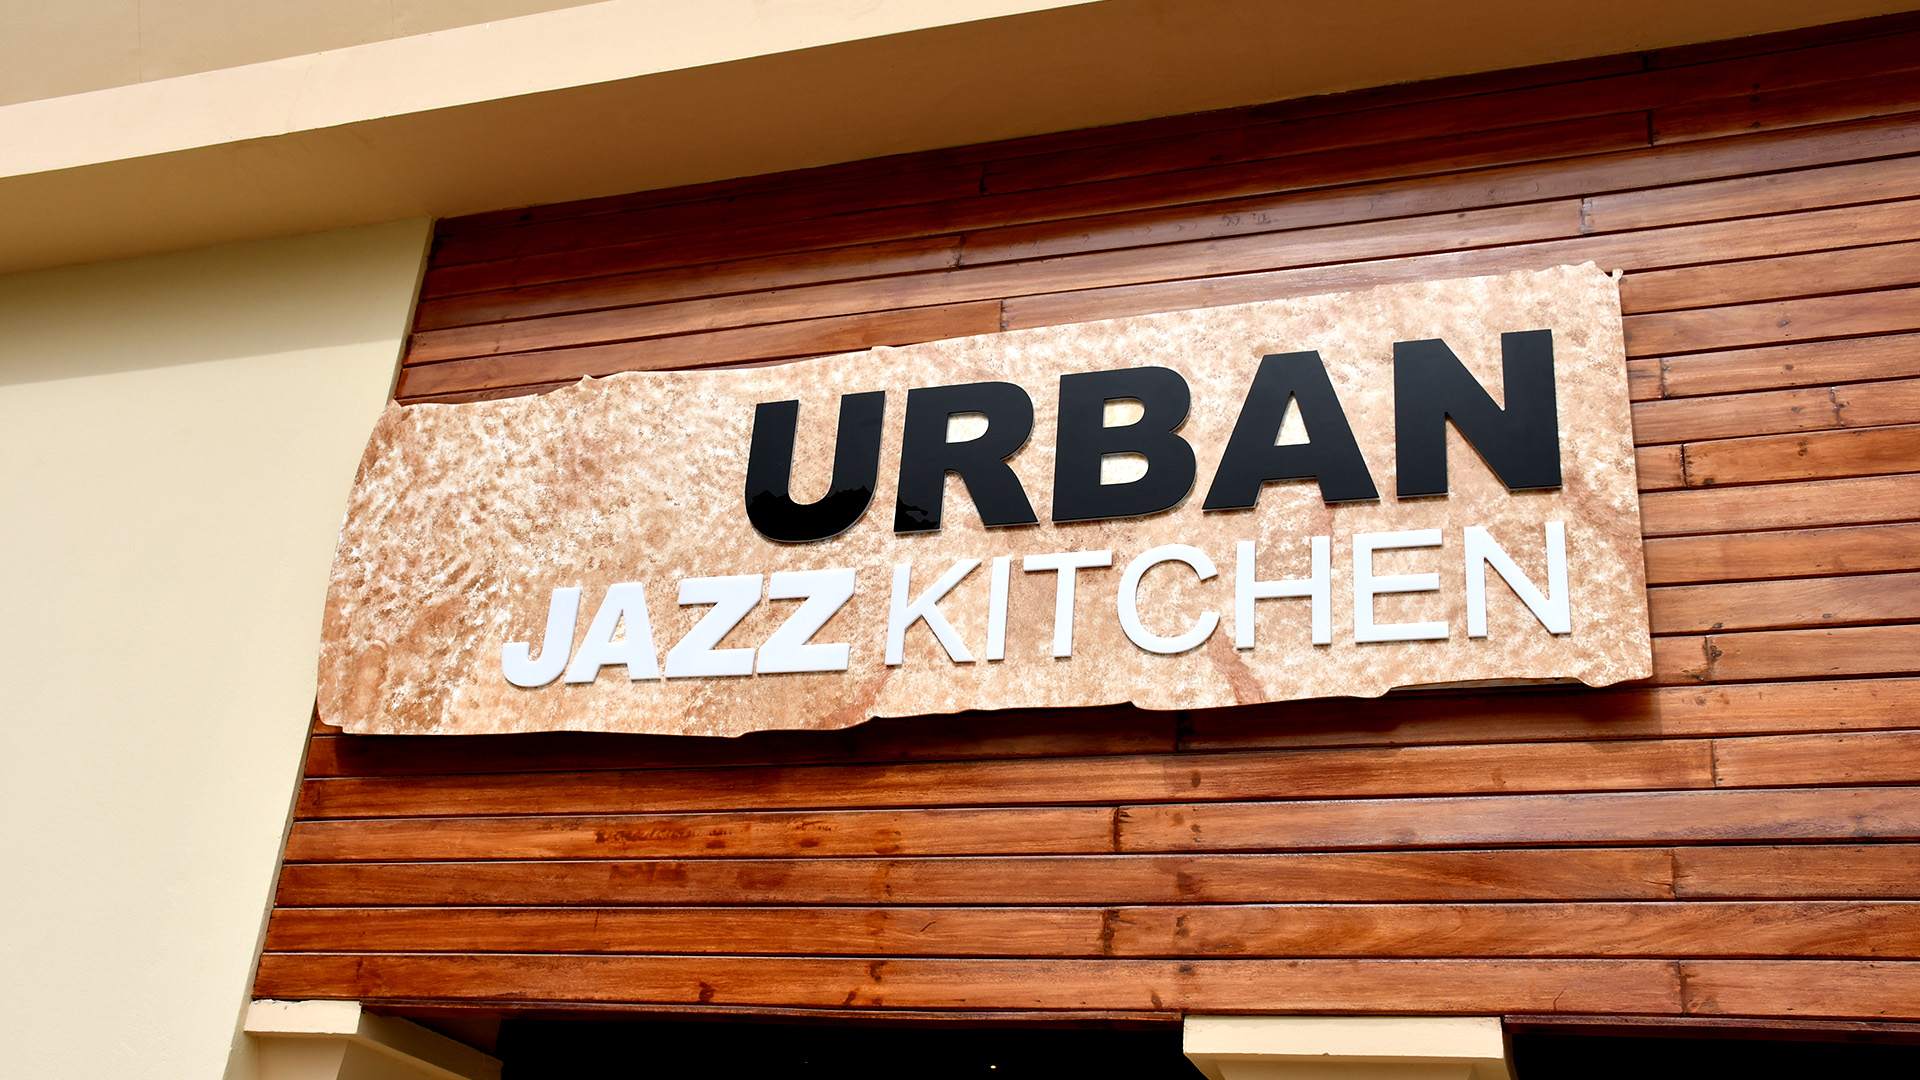 LED Lit Push Through shopfront signs for Urban Jazz Kitchen on The Pearl, fabricated and installed by ME Visual, Qatar